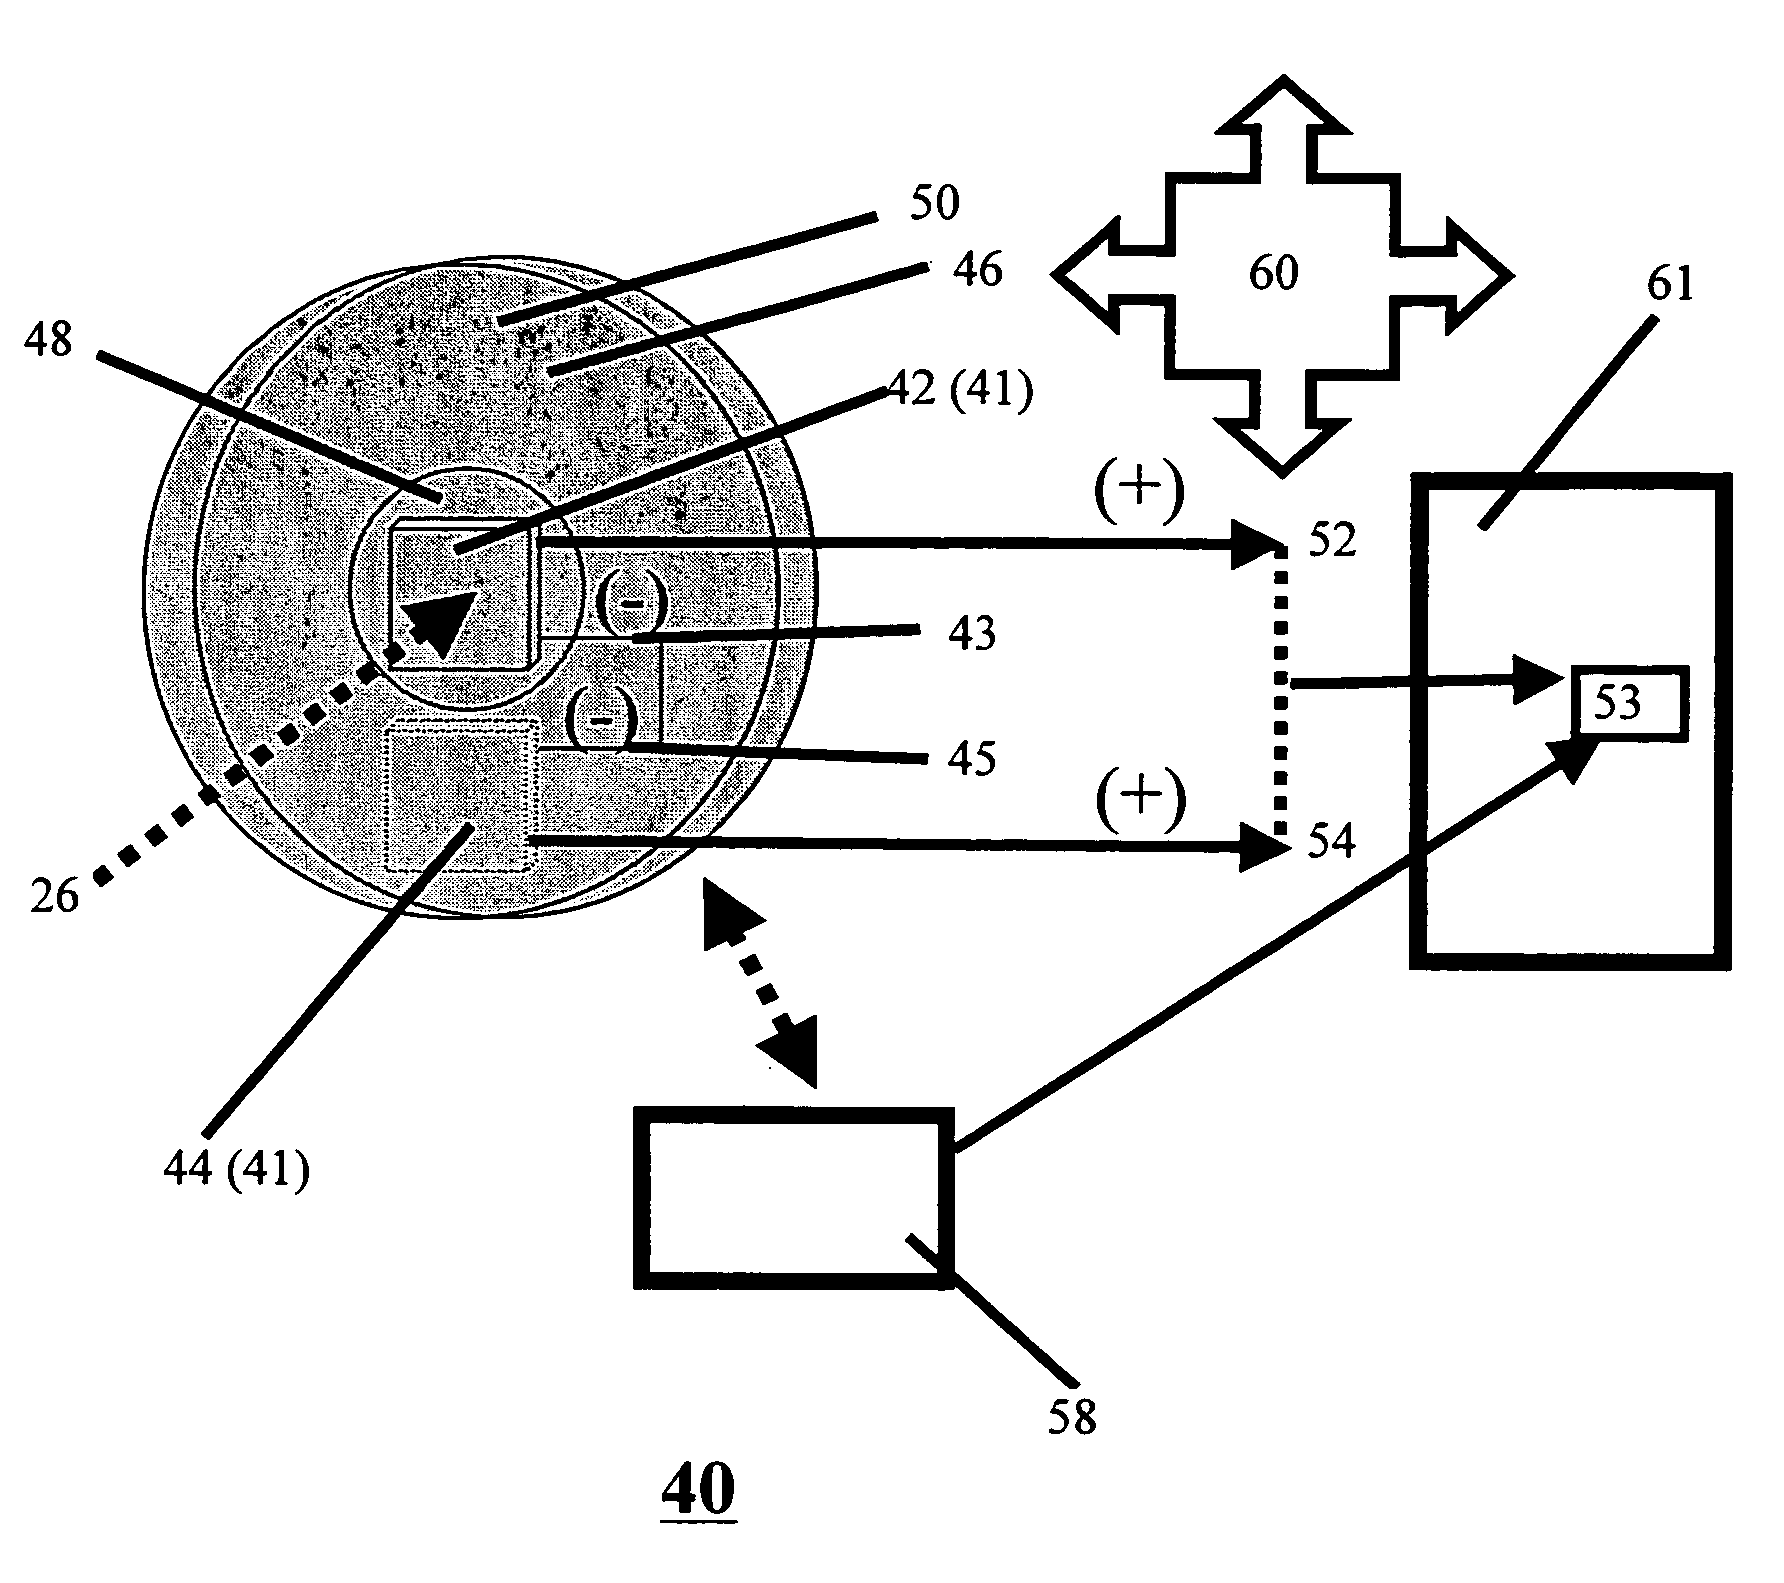 Device and method for measurement of incident power and energy